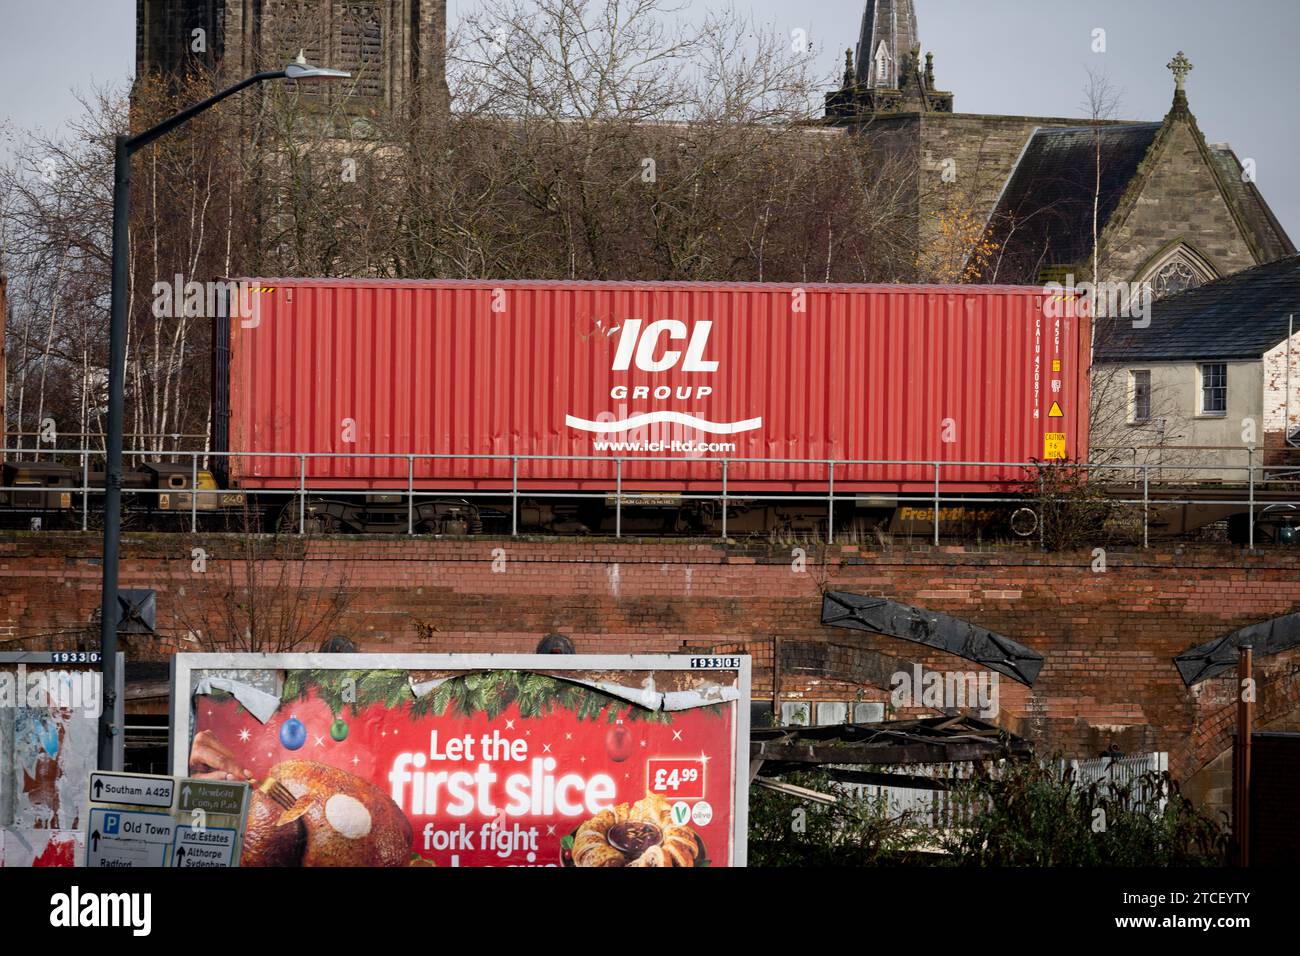 ICL Group shipping container on a freightliner train, Leamington Spa, Warwickshire, UK Stock Photo